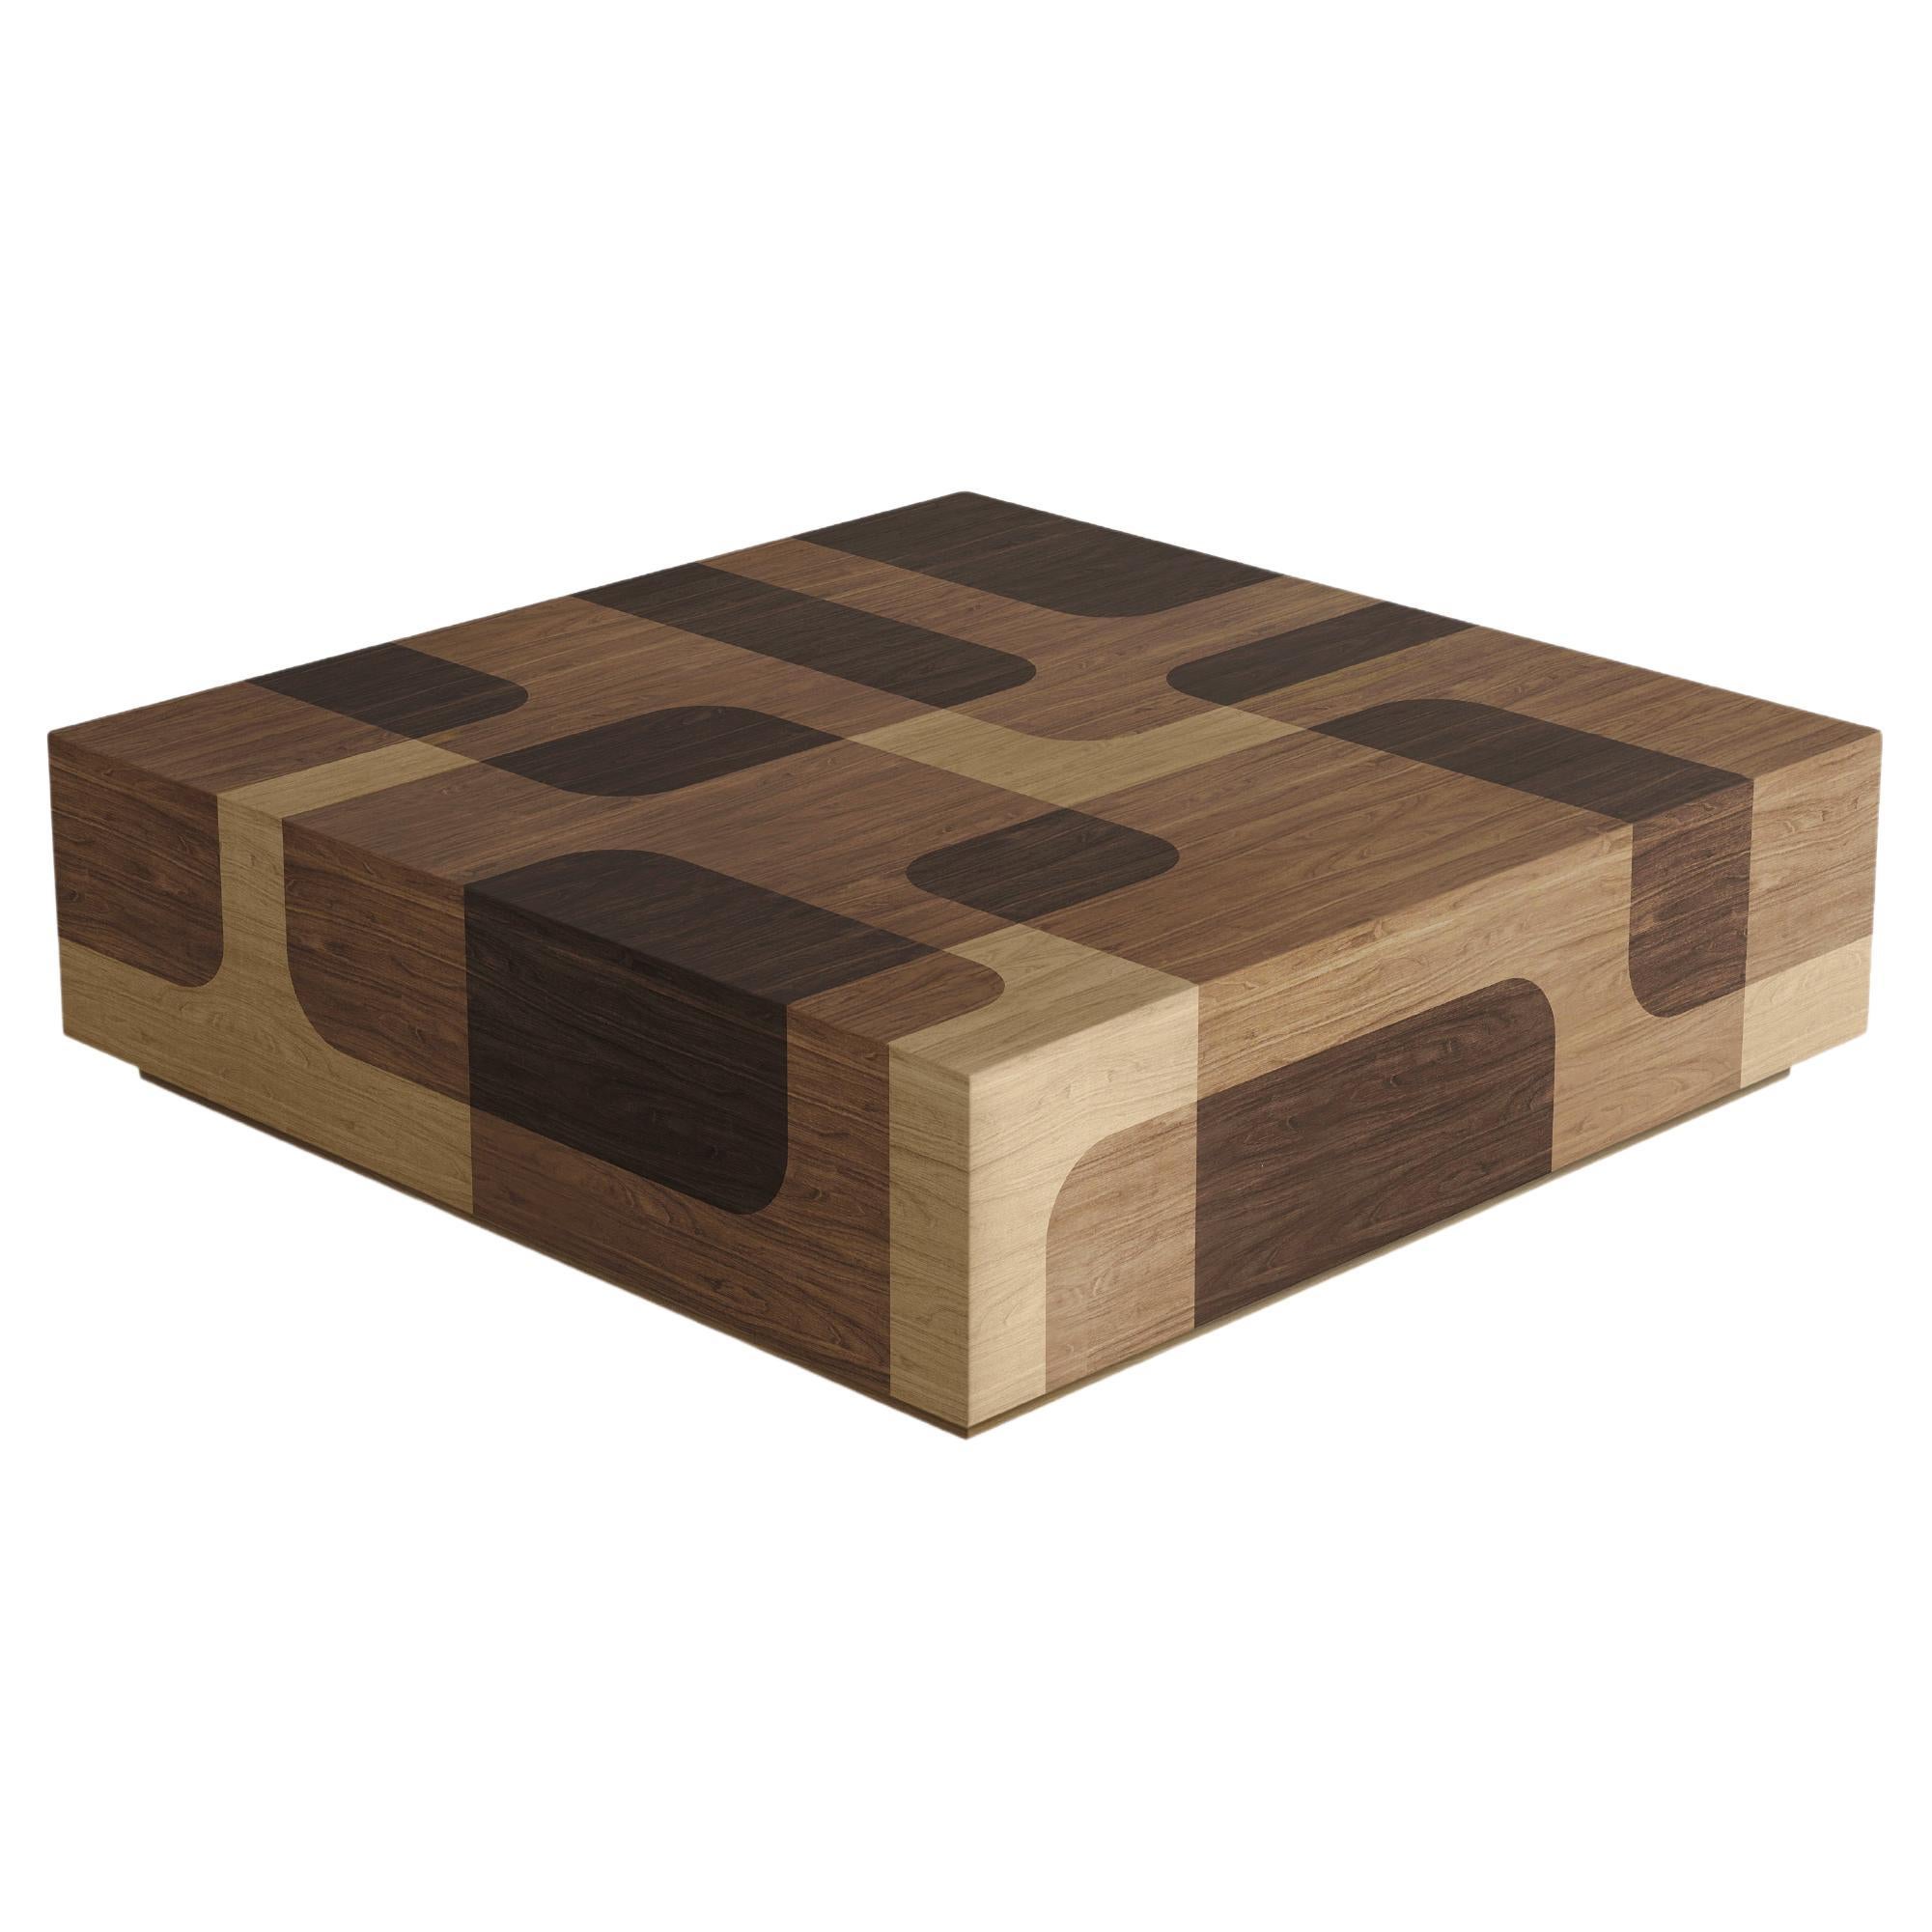 Bodega Square Coffee Table, in Warm Wood Marquetry Veneer Table by Joel Escalona